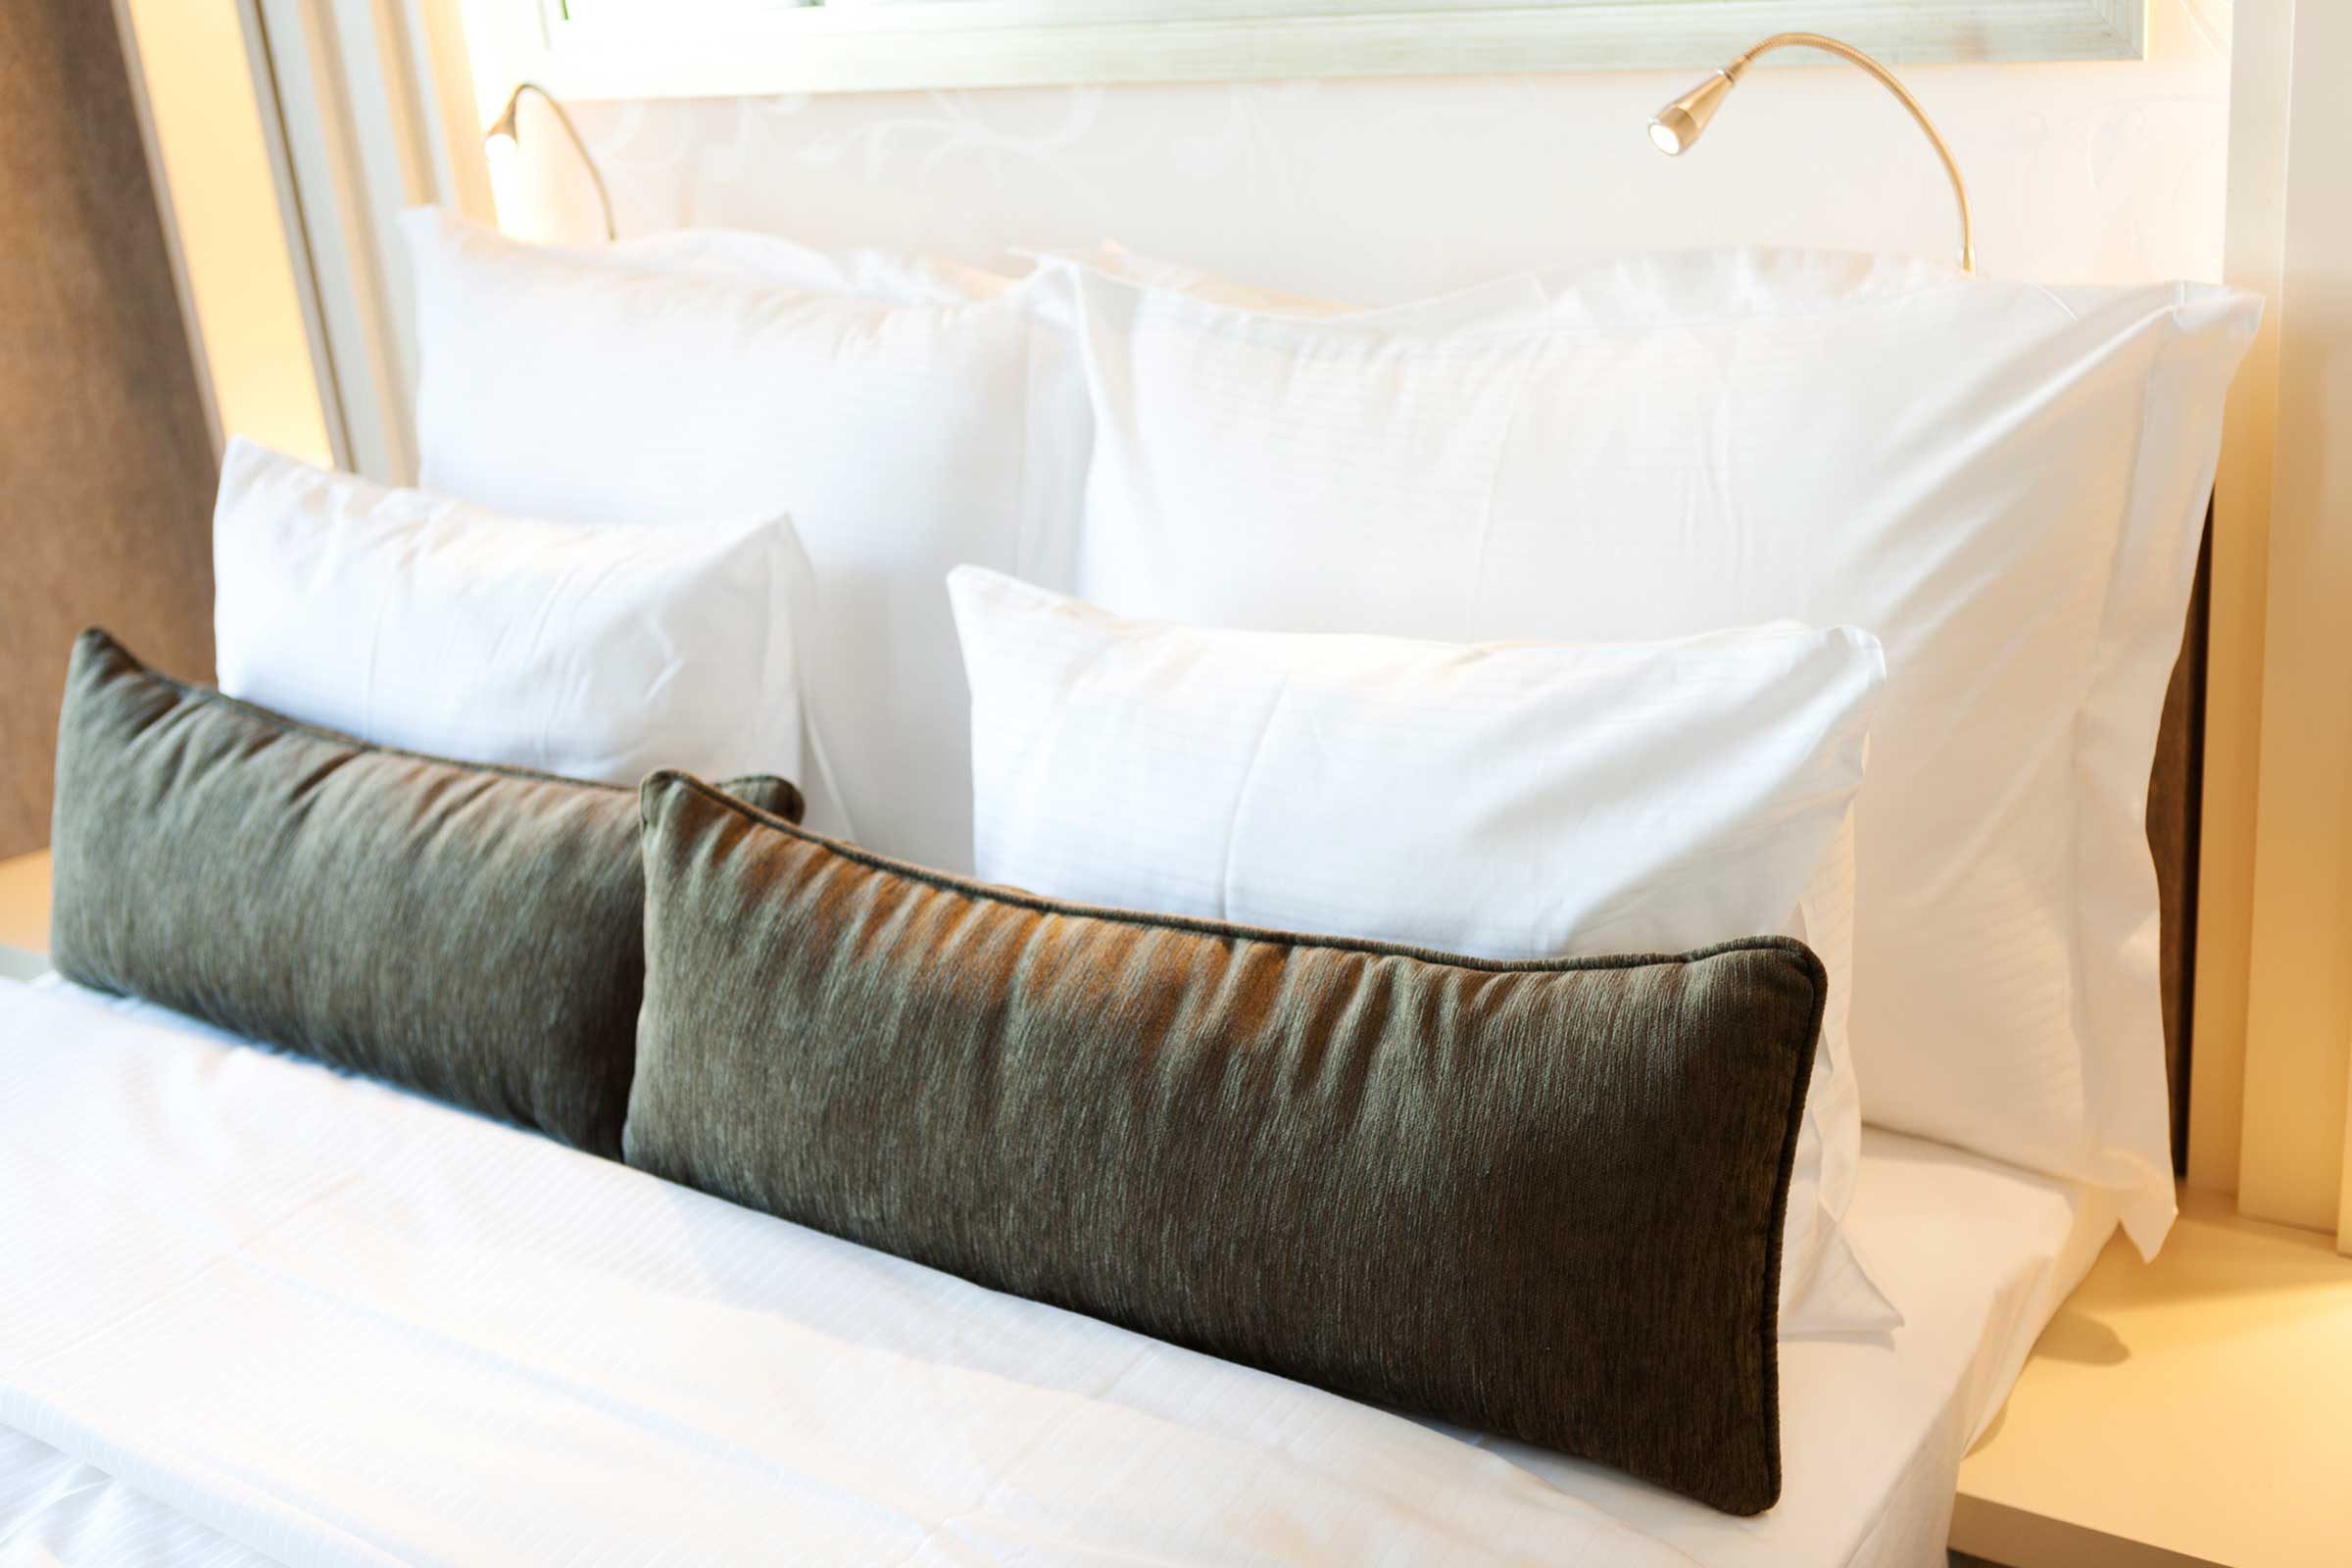 https://www.rd.com/wp-content/uploads/2016/11/01-The-Little-Secret-to-Perfectly-Fluffed-Hotel-Like-Pillows_175480084_gokhanilgaz.jpg?fit=640%2C427